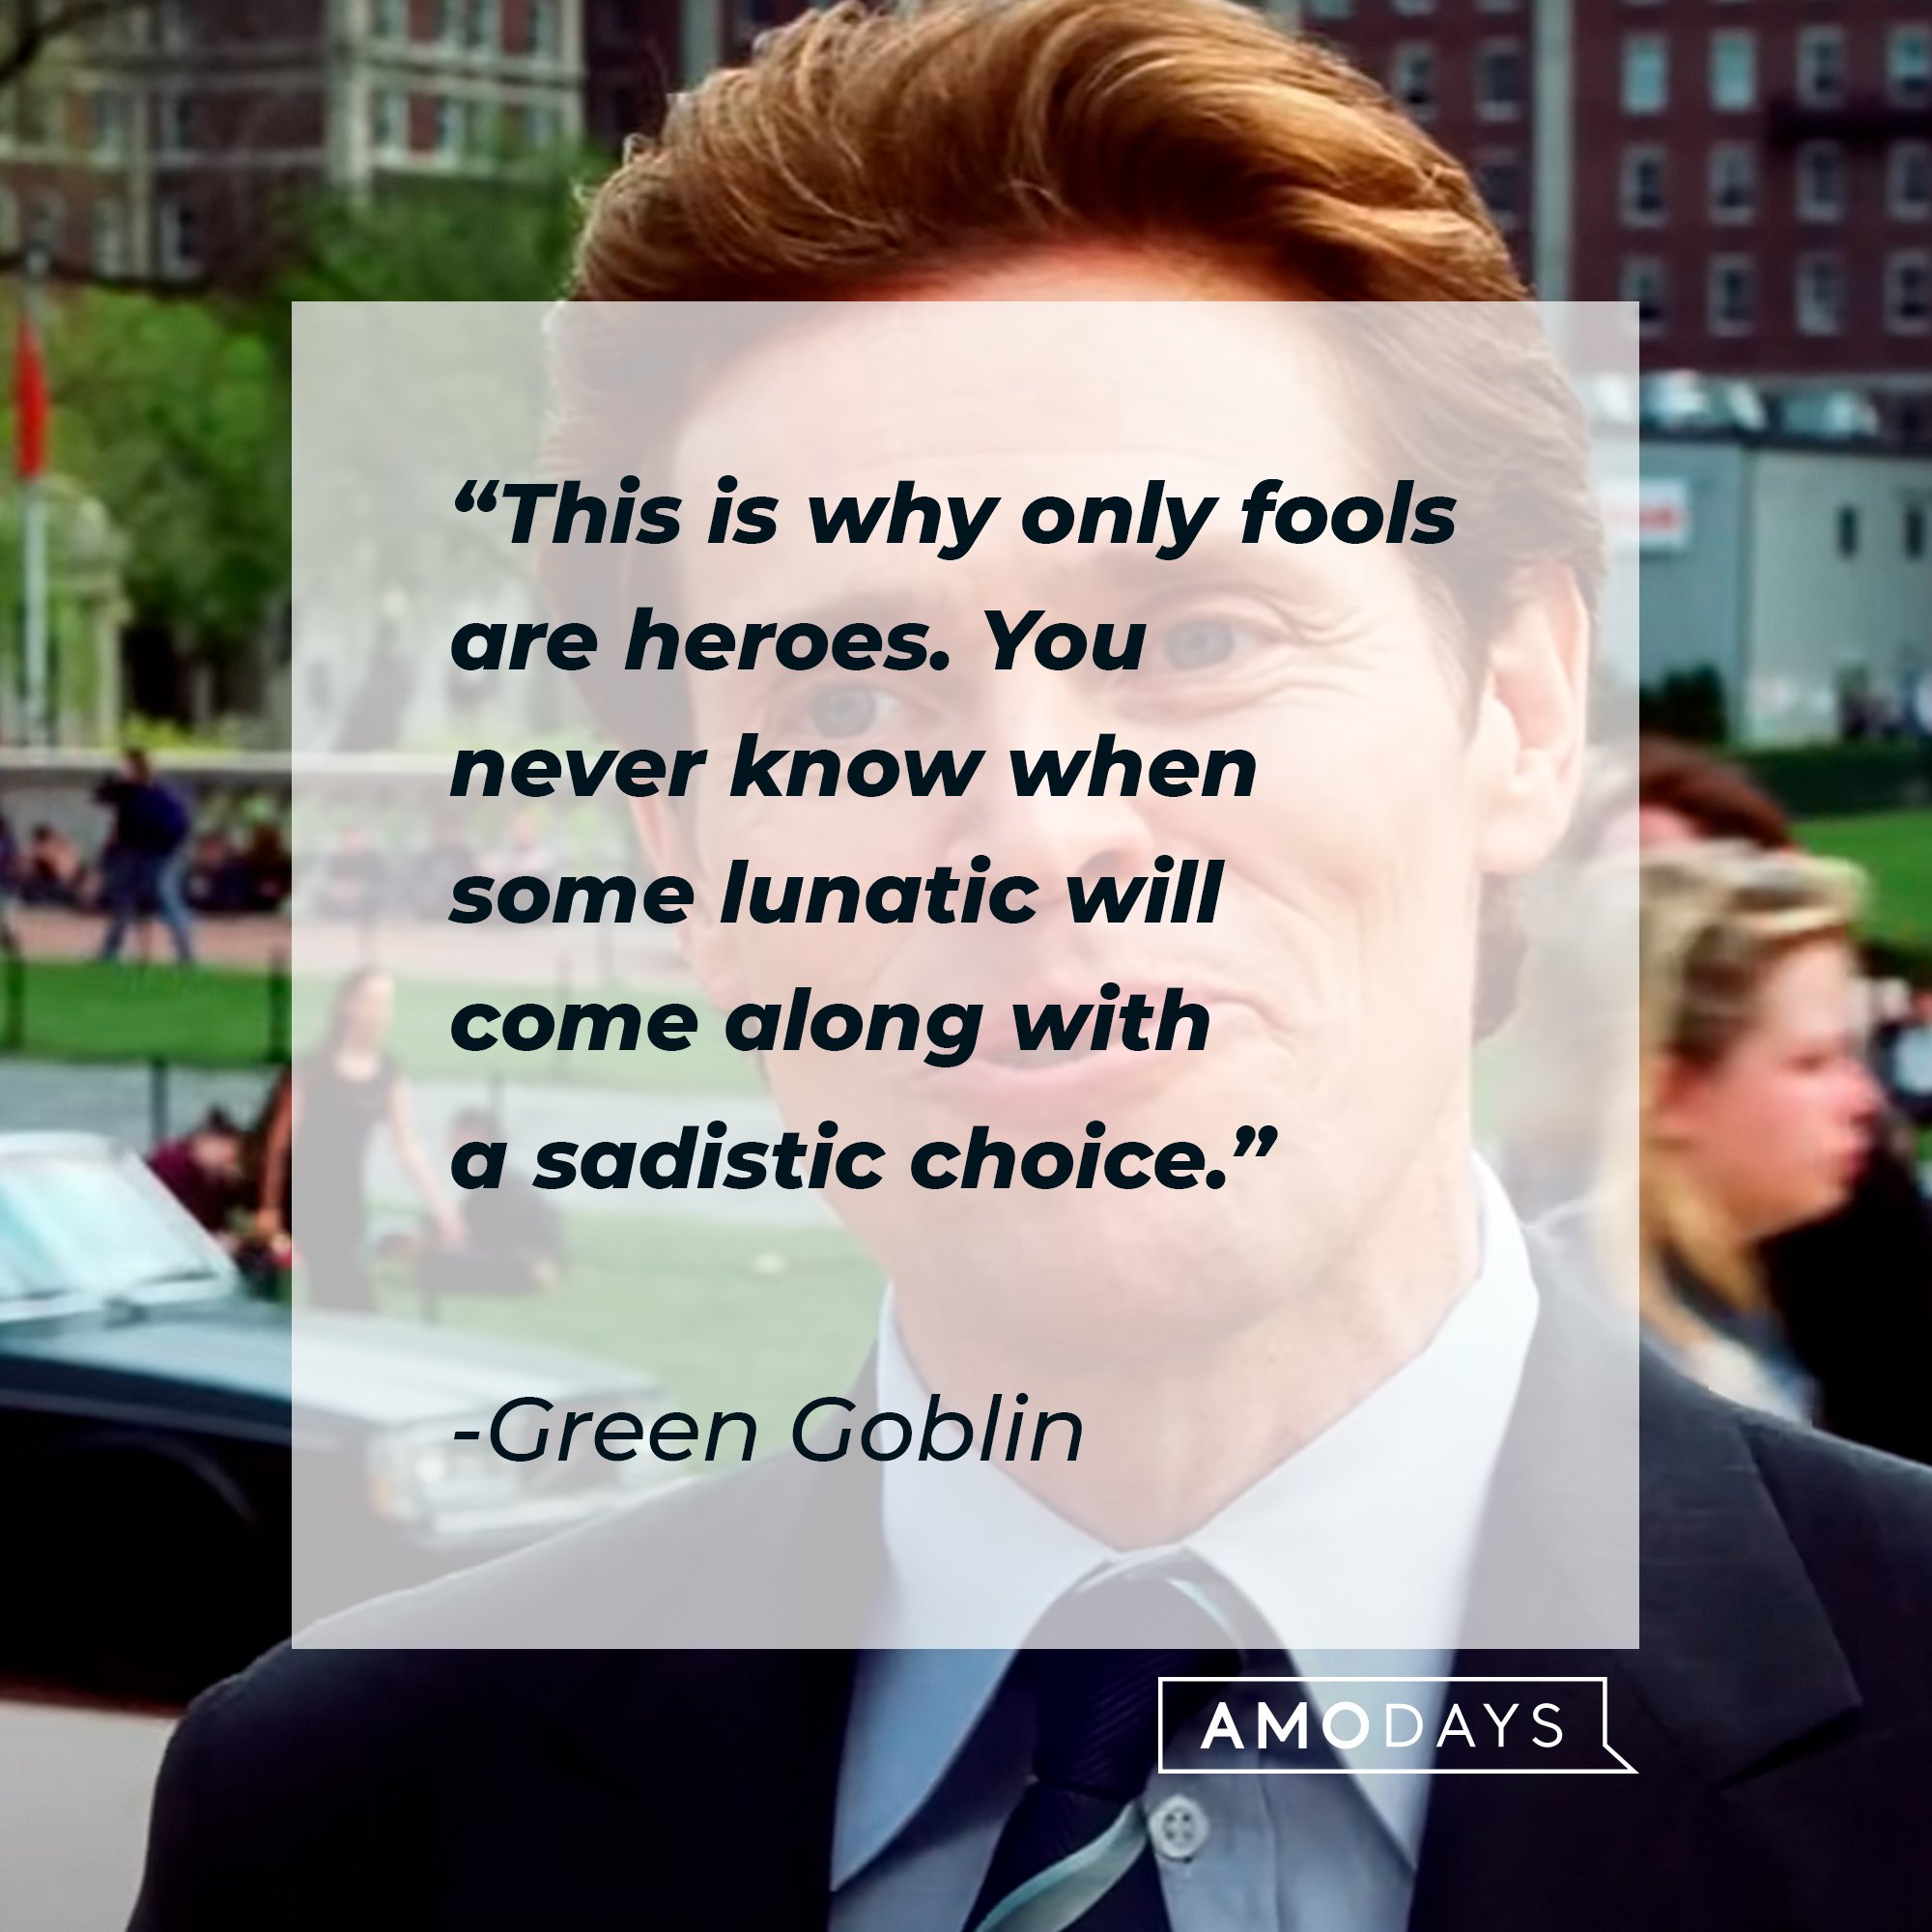 Green Goblin’s quote: "This is why only fools are heroes. You never know when some lunatic will come along with a sadistic choice."| Image: AmoDays